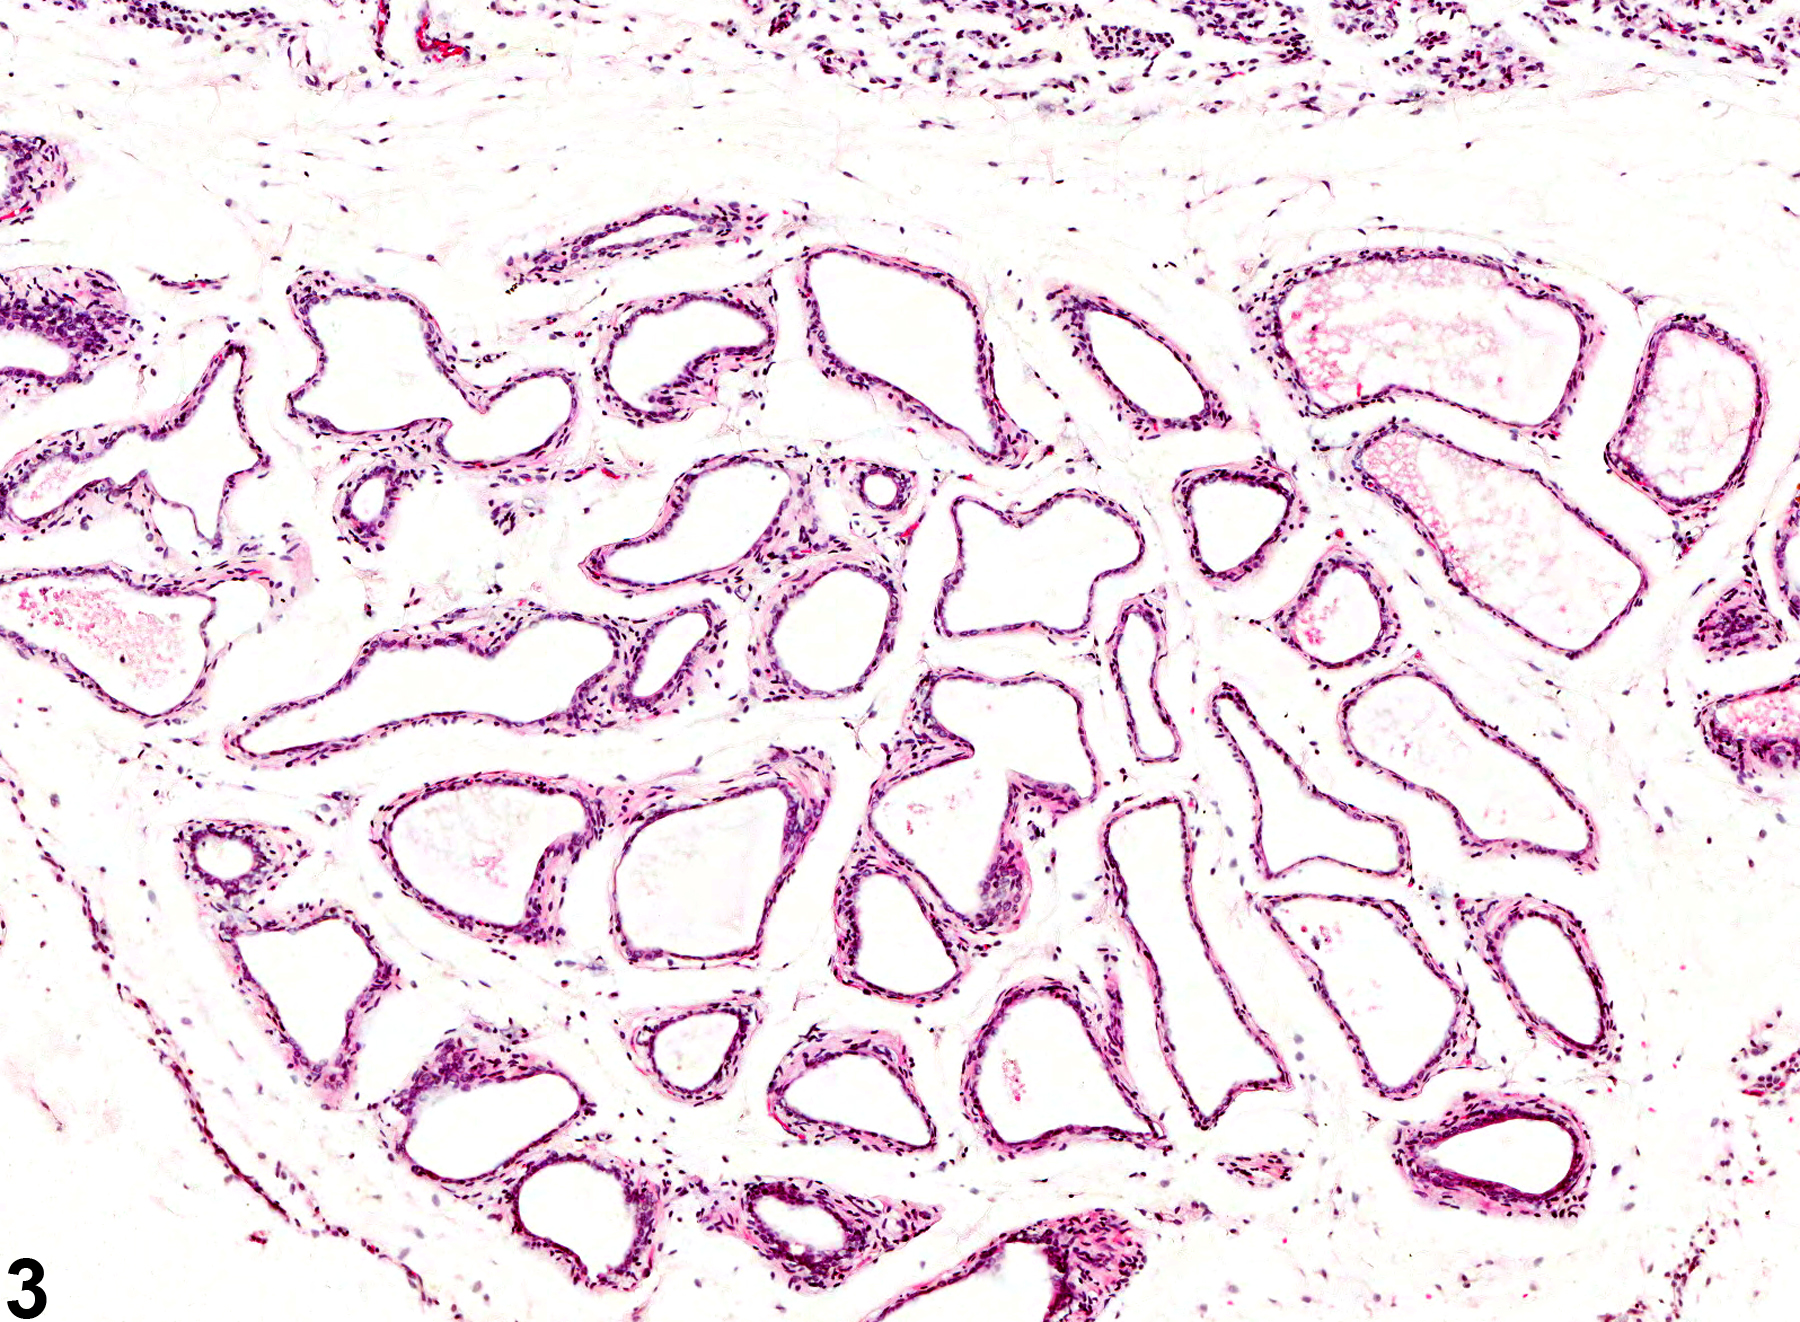 Image of acinar atrophy in the prostate from a male F344/N rat in a subchronic study